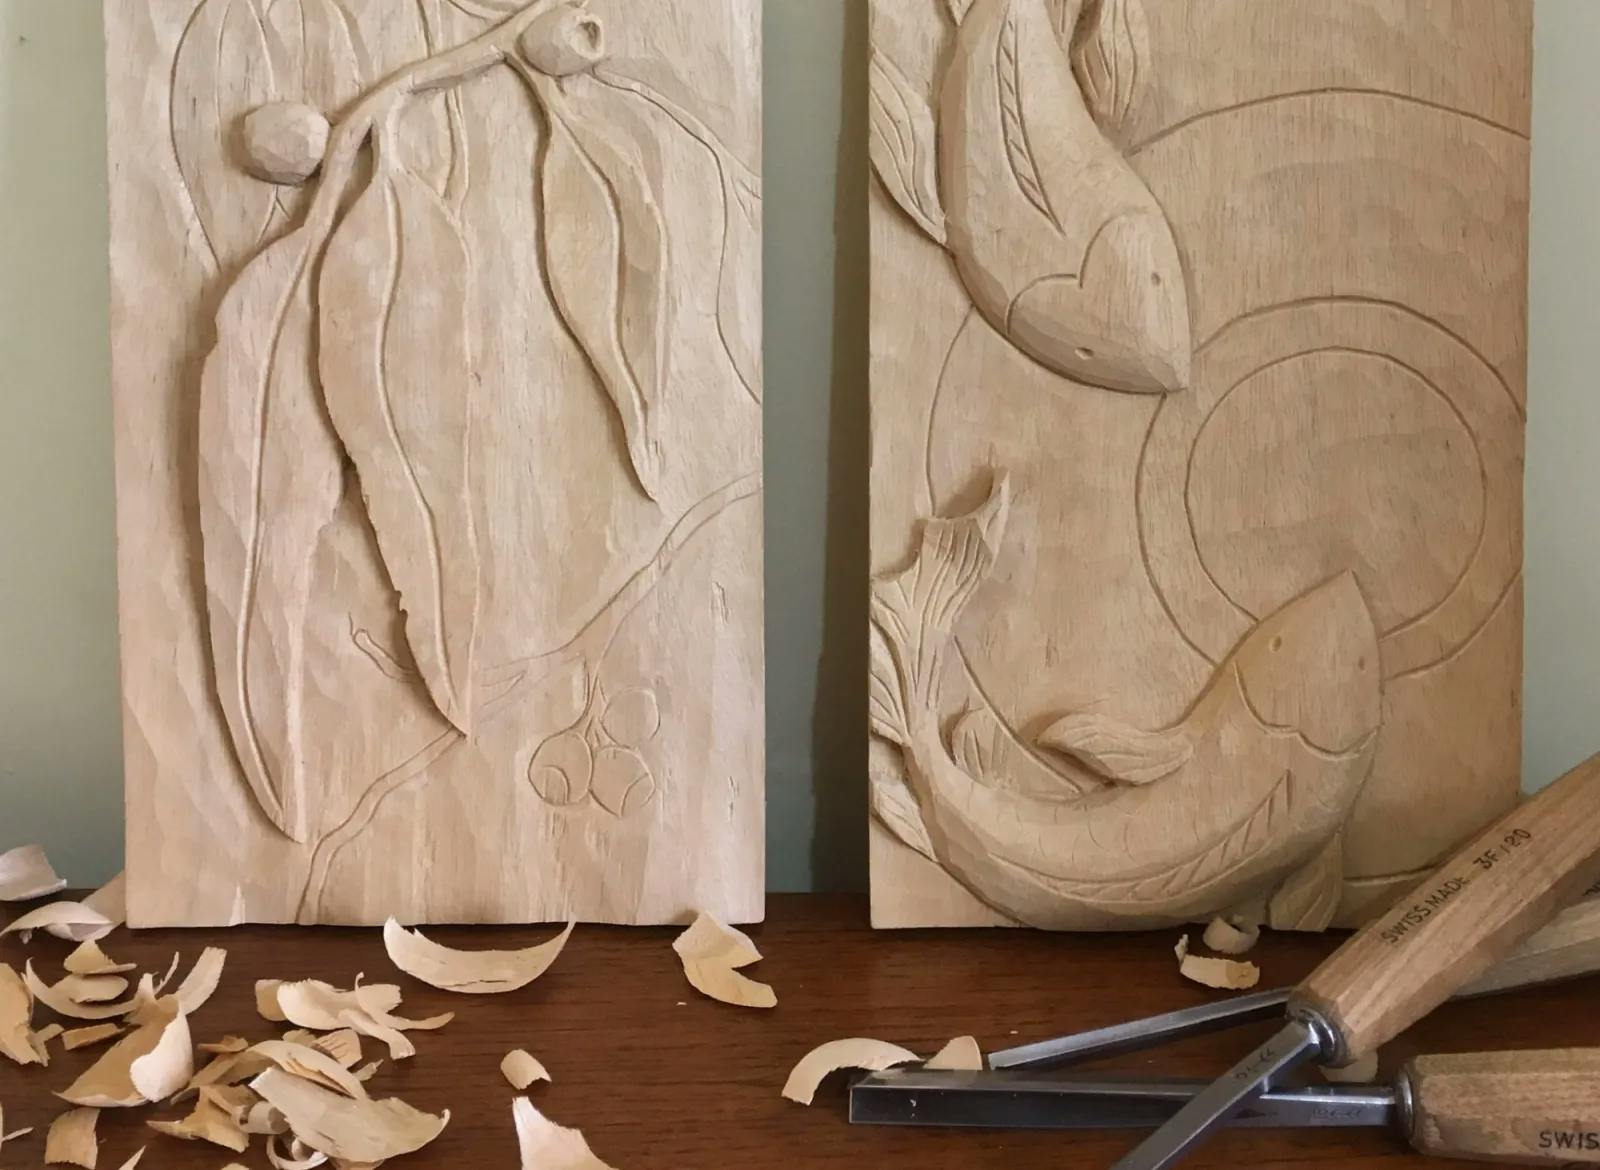 Relief Carving (Koi Fish or Gum Leaves)